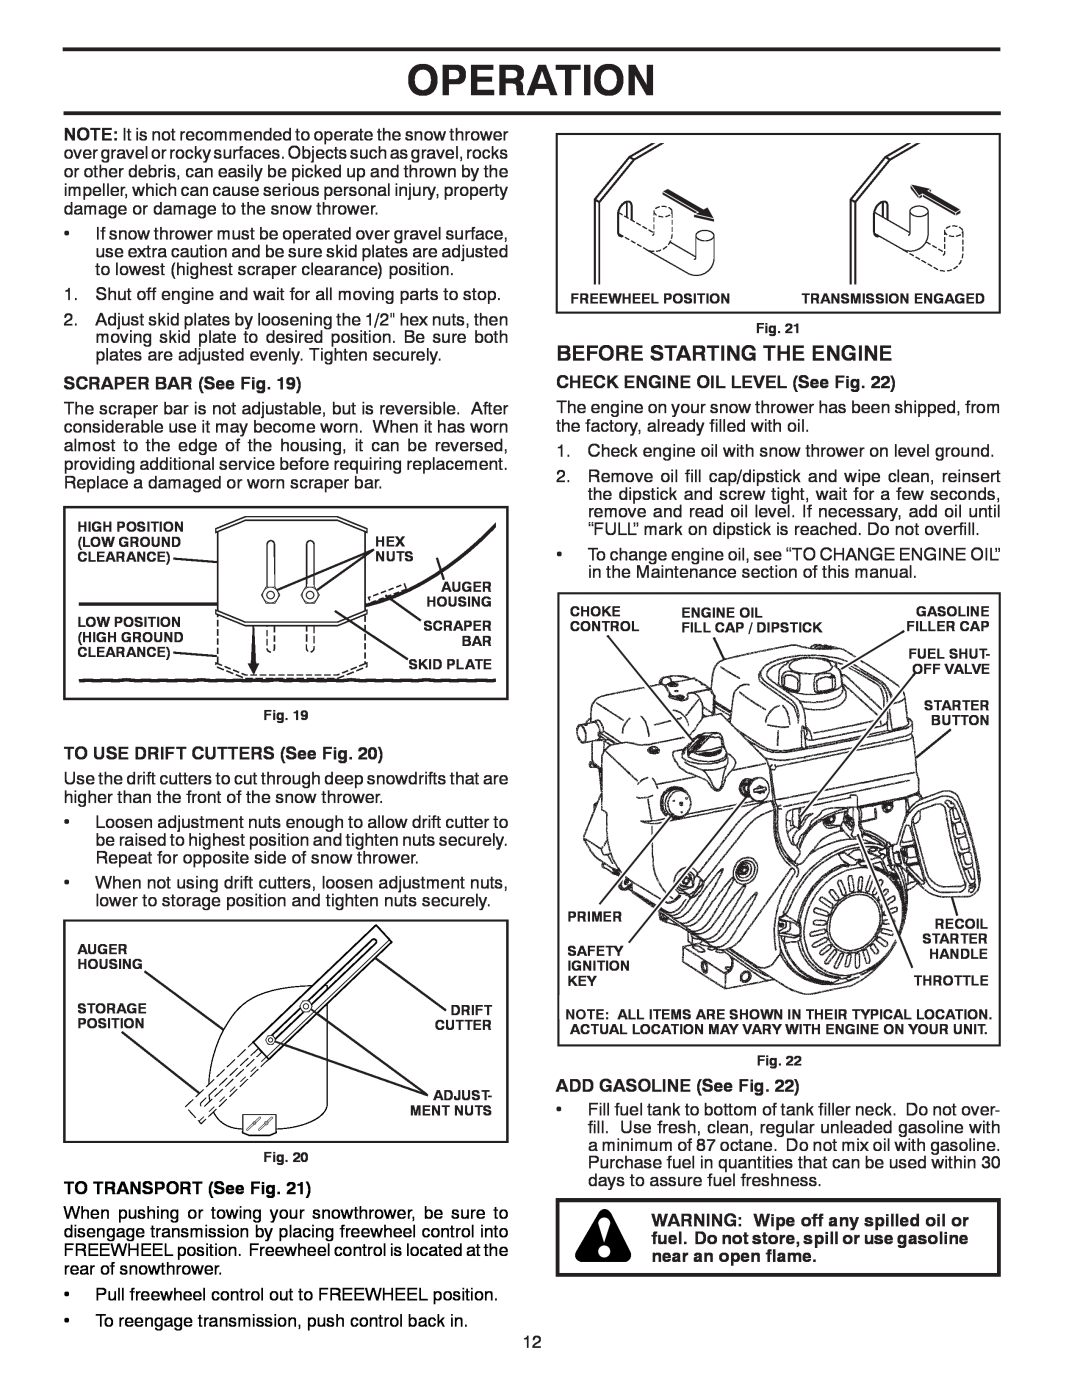 Husqvarna 1130SB-XLSB owner manual Before Starting The Engine, Operation, SCRAPER BAR See Fig, TO USE DRIFT CUTTERS See Fig 